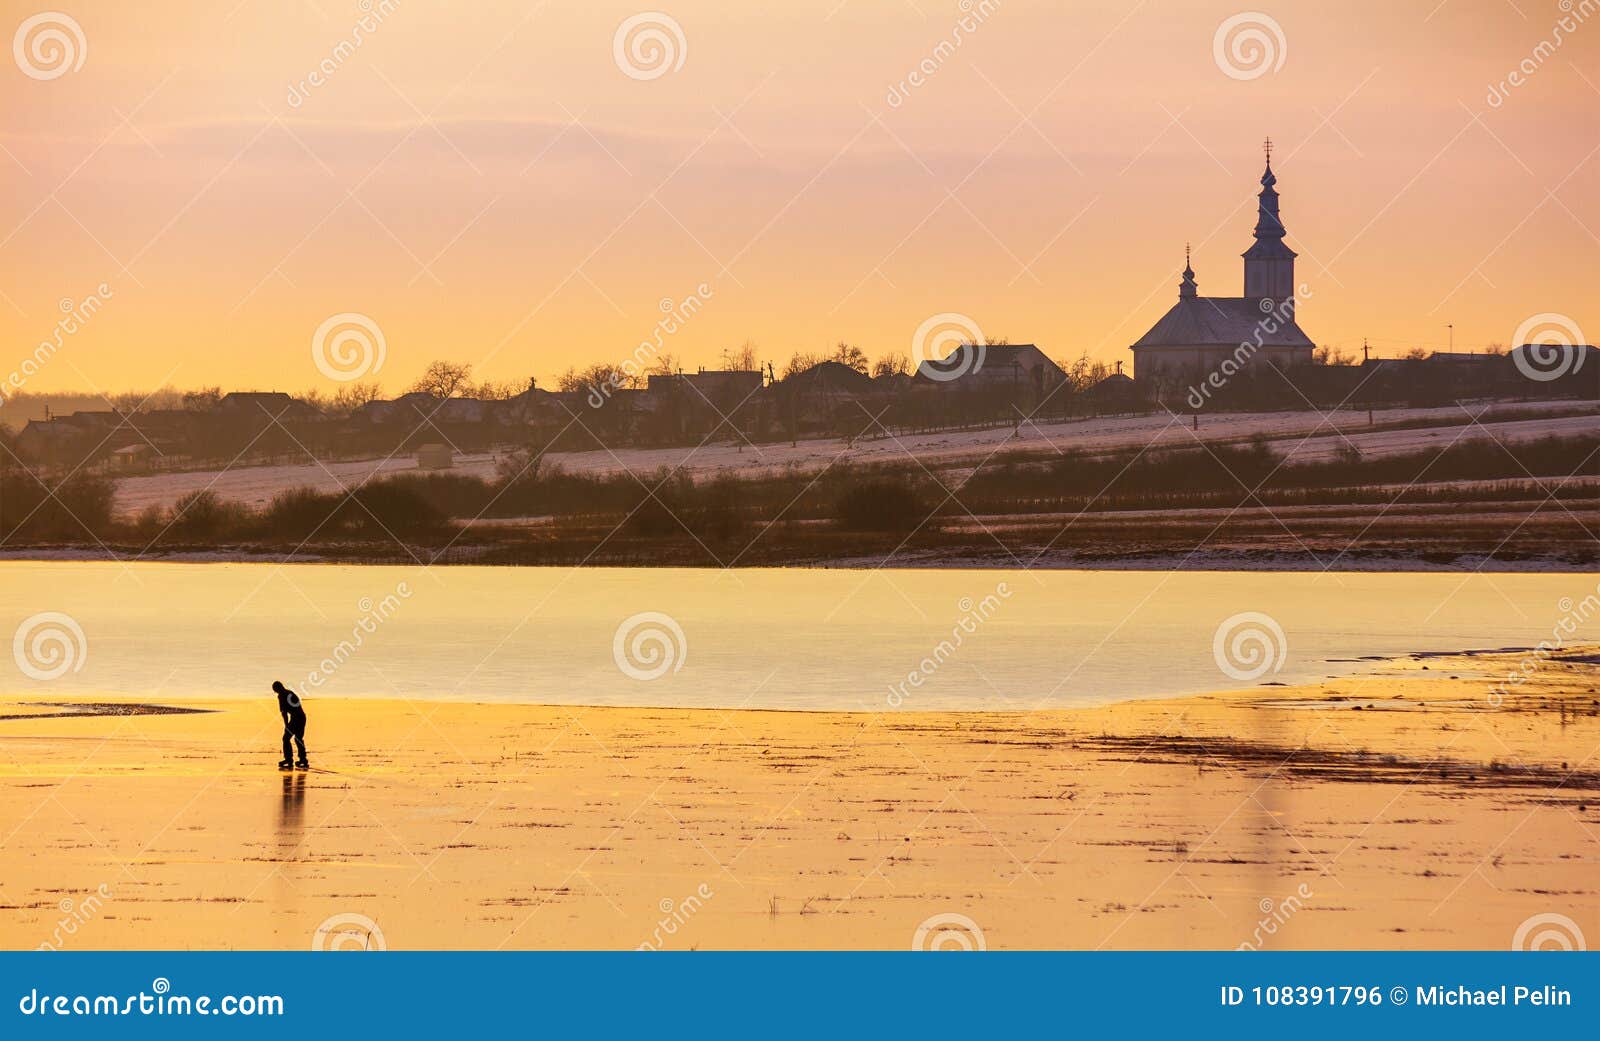 undefined person skating on the frozen lake